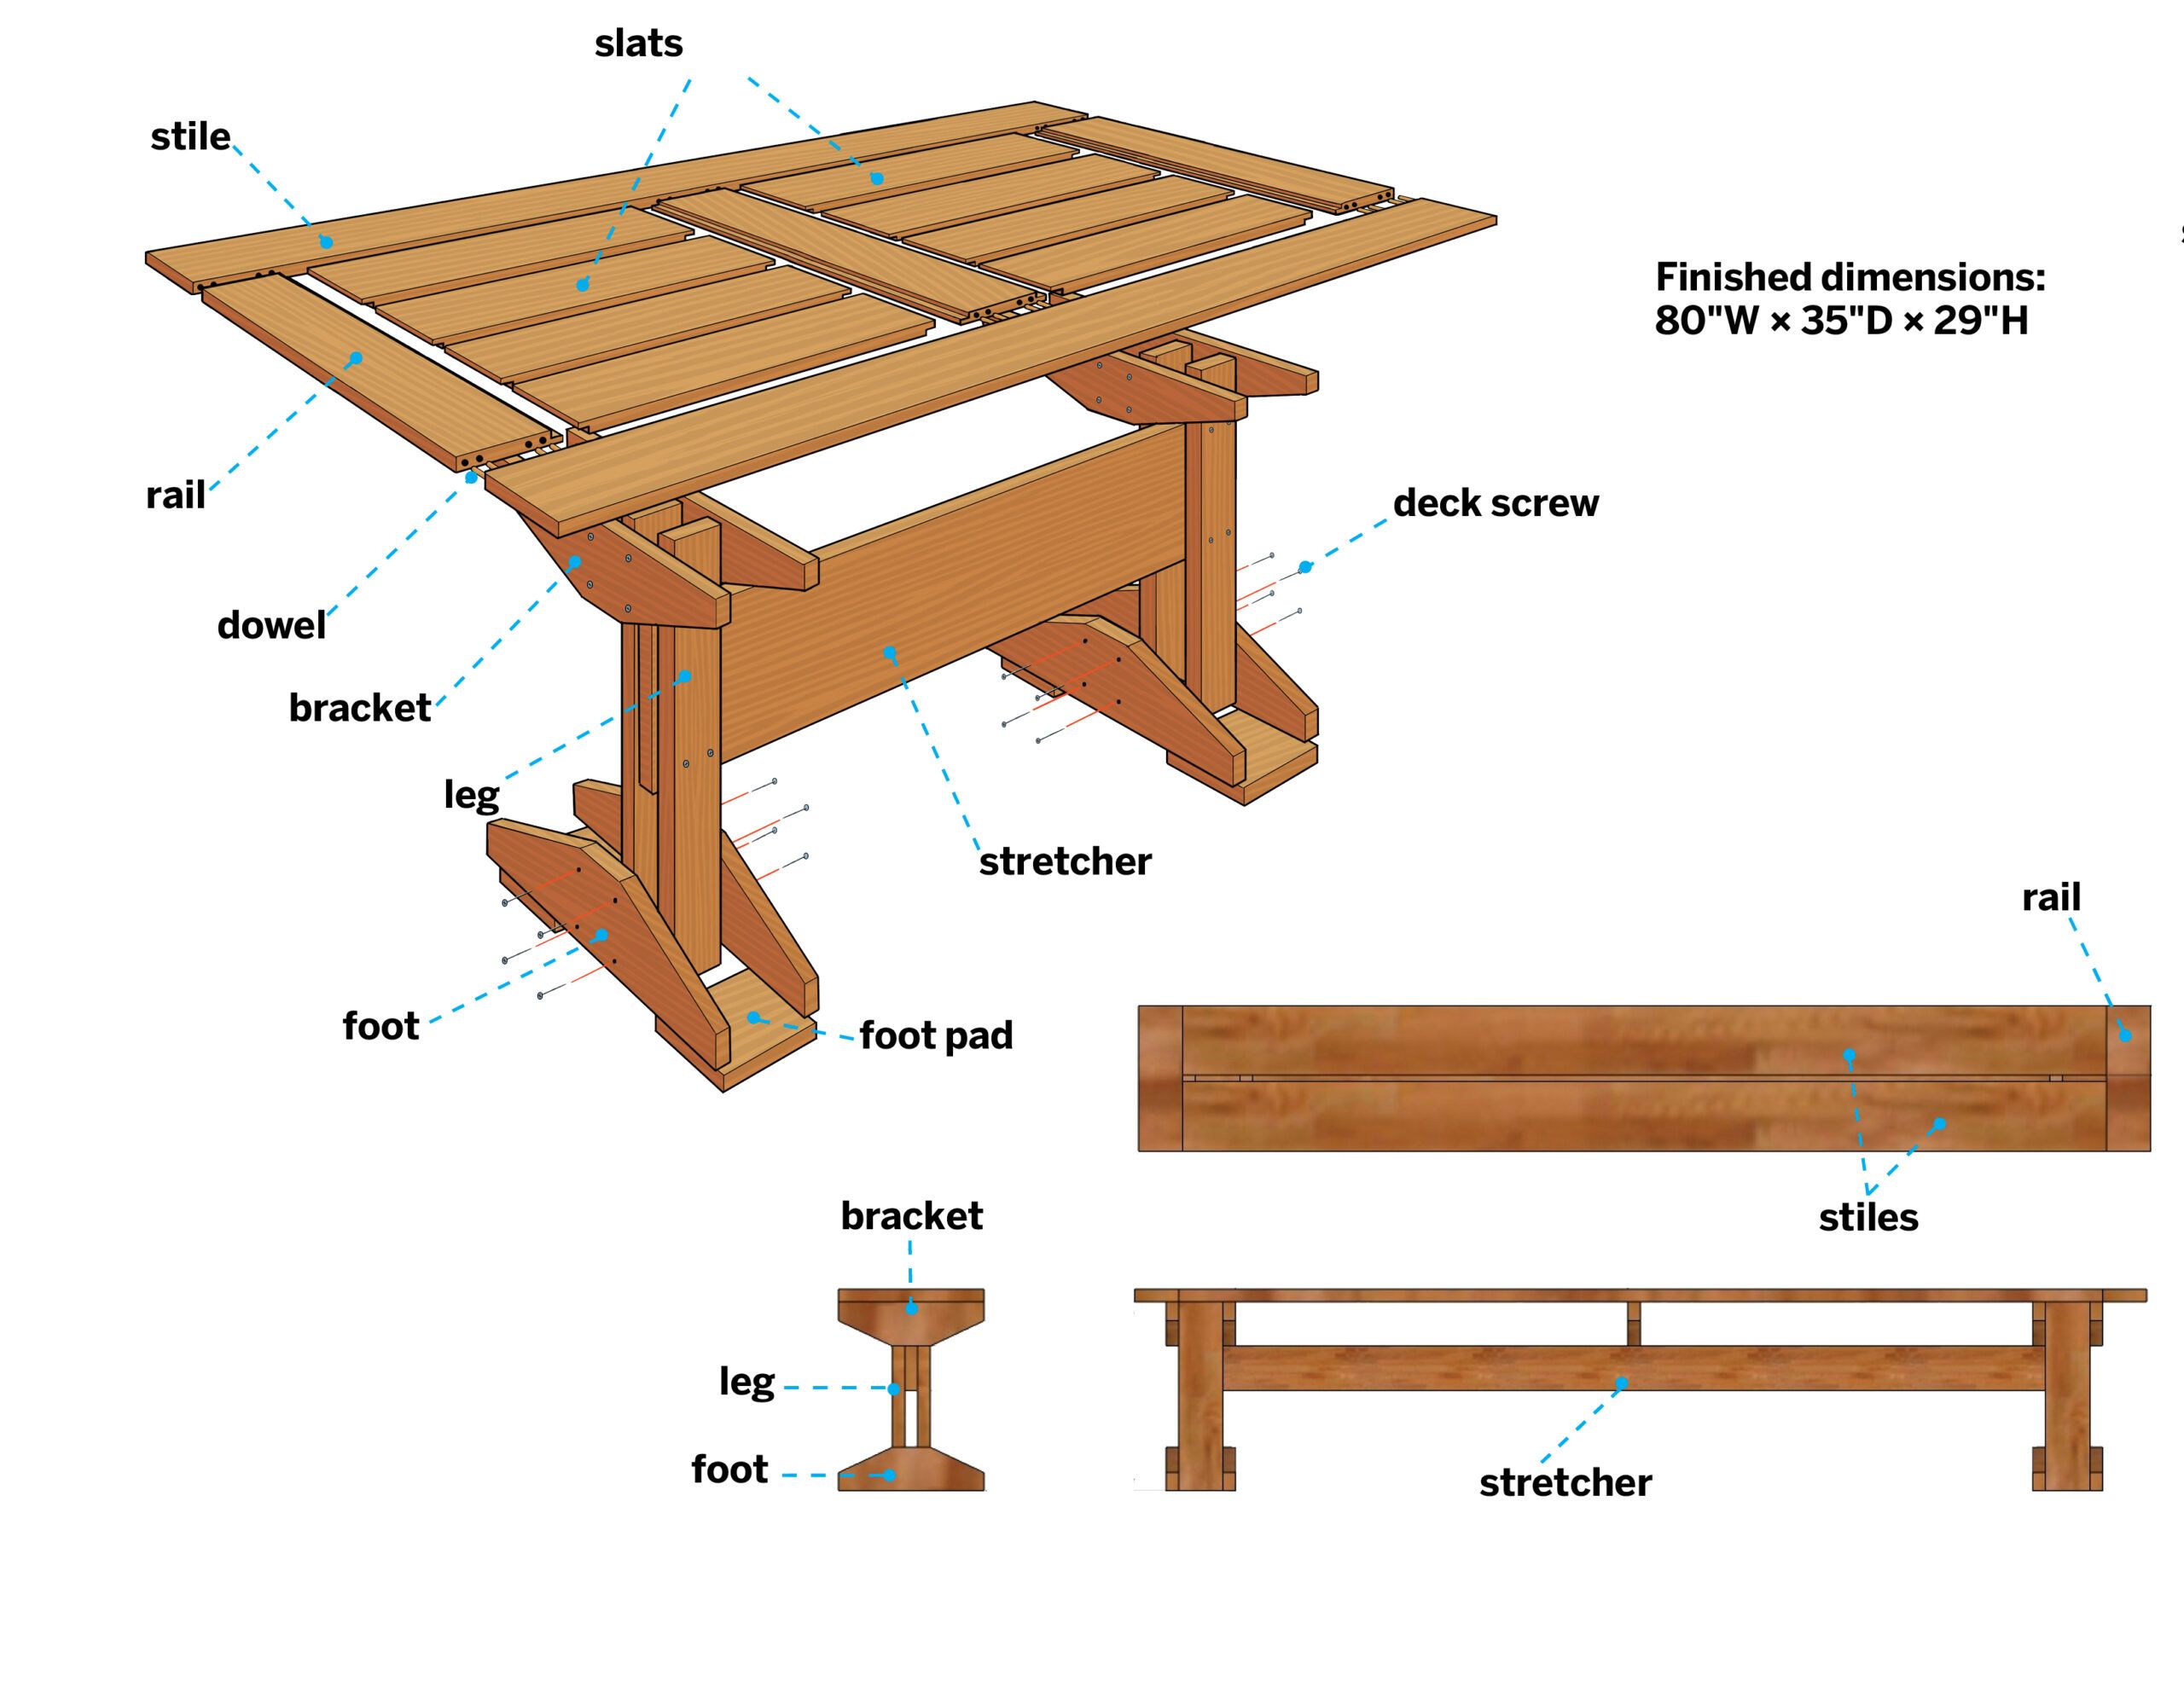 How to Build an ADA Picnic Table